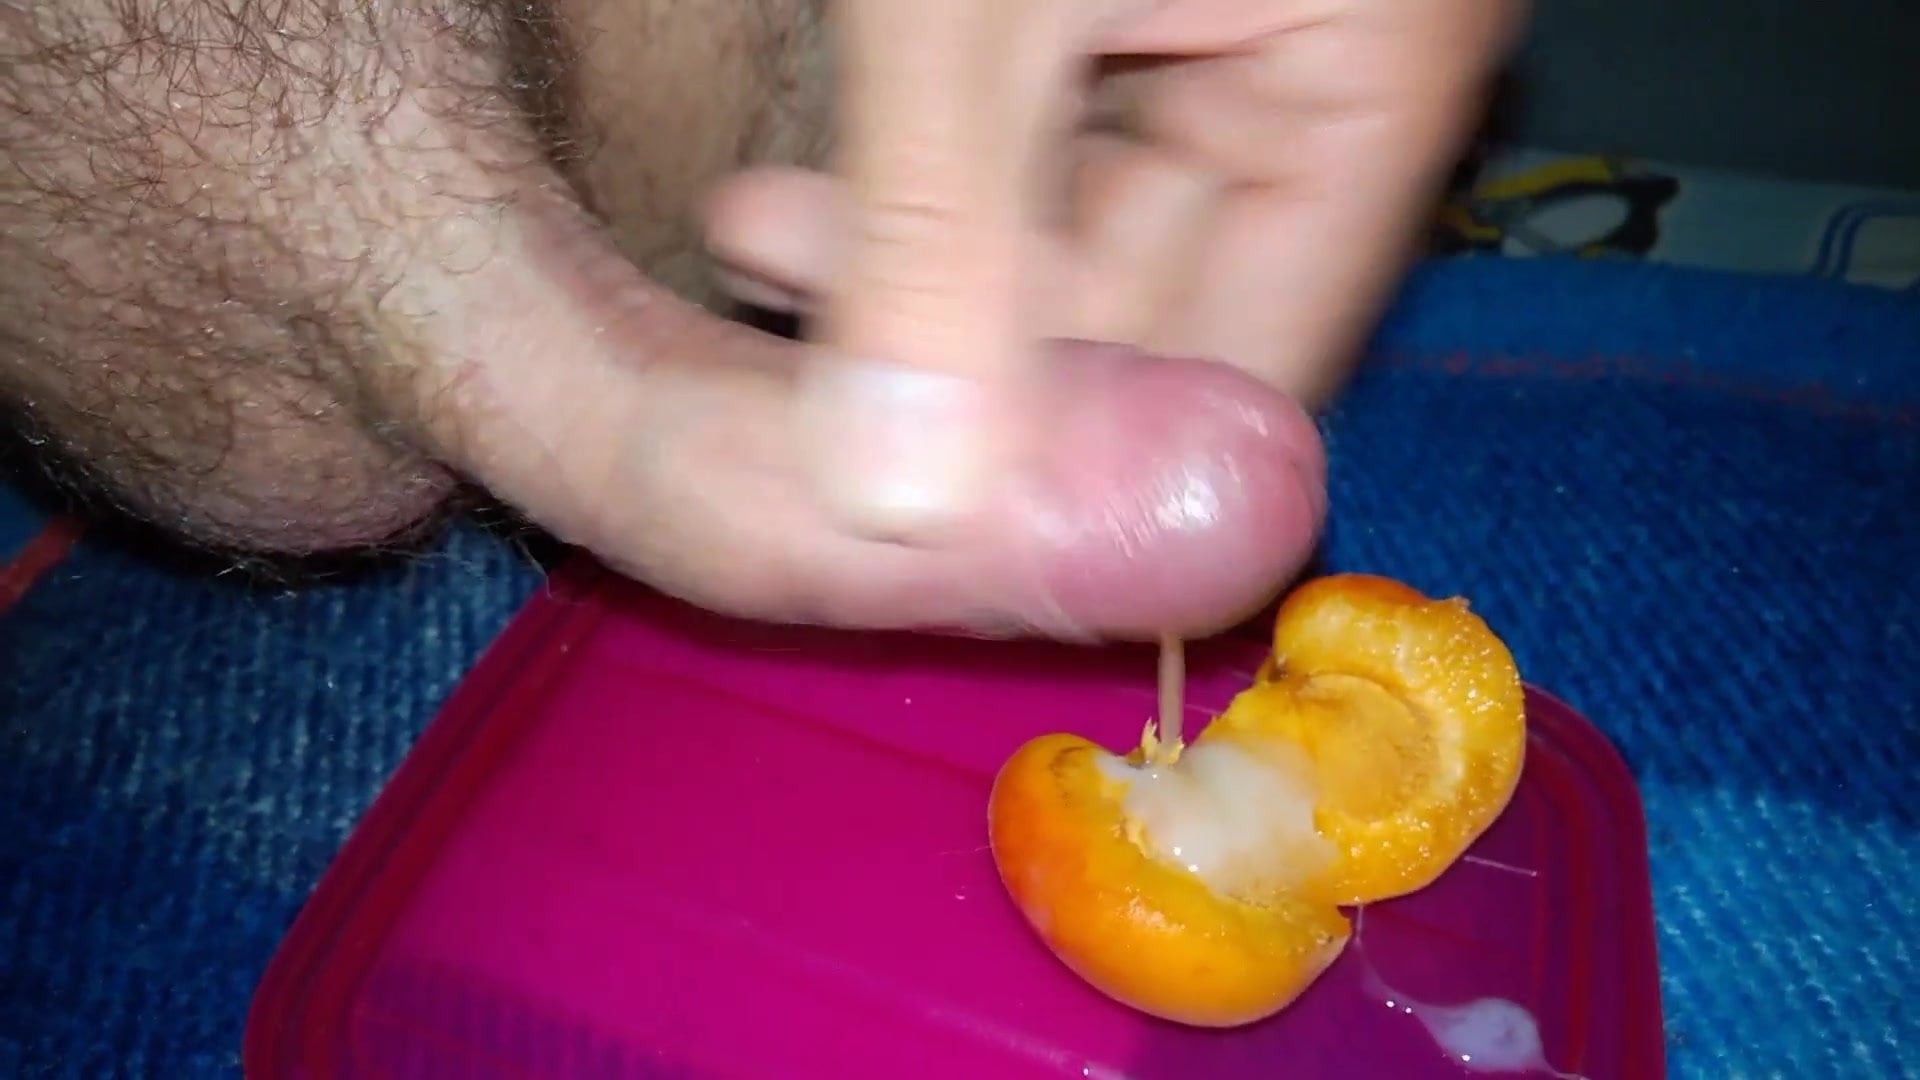 Cum on Fruit and Eat: Gay Cumming on HD Porn Video 67 xHamster.